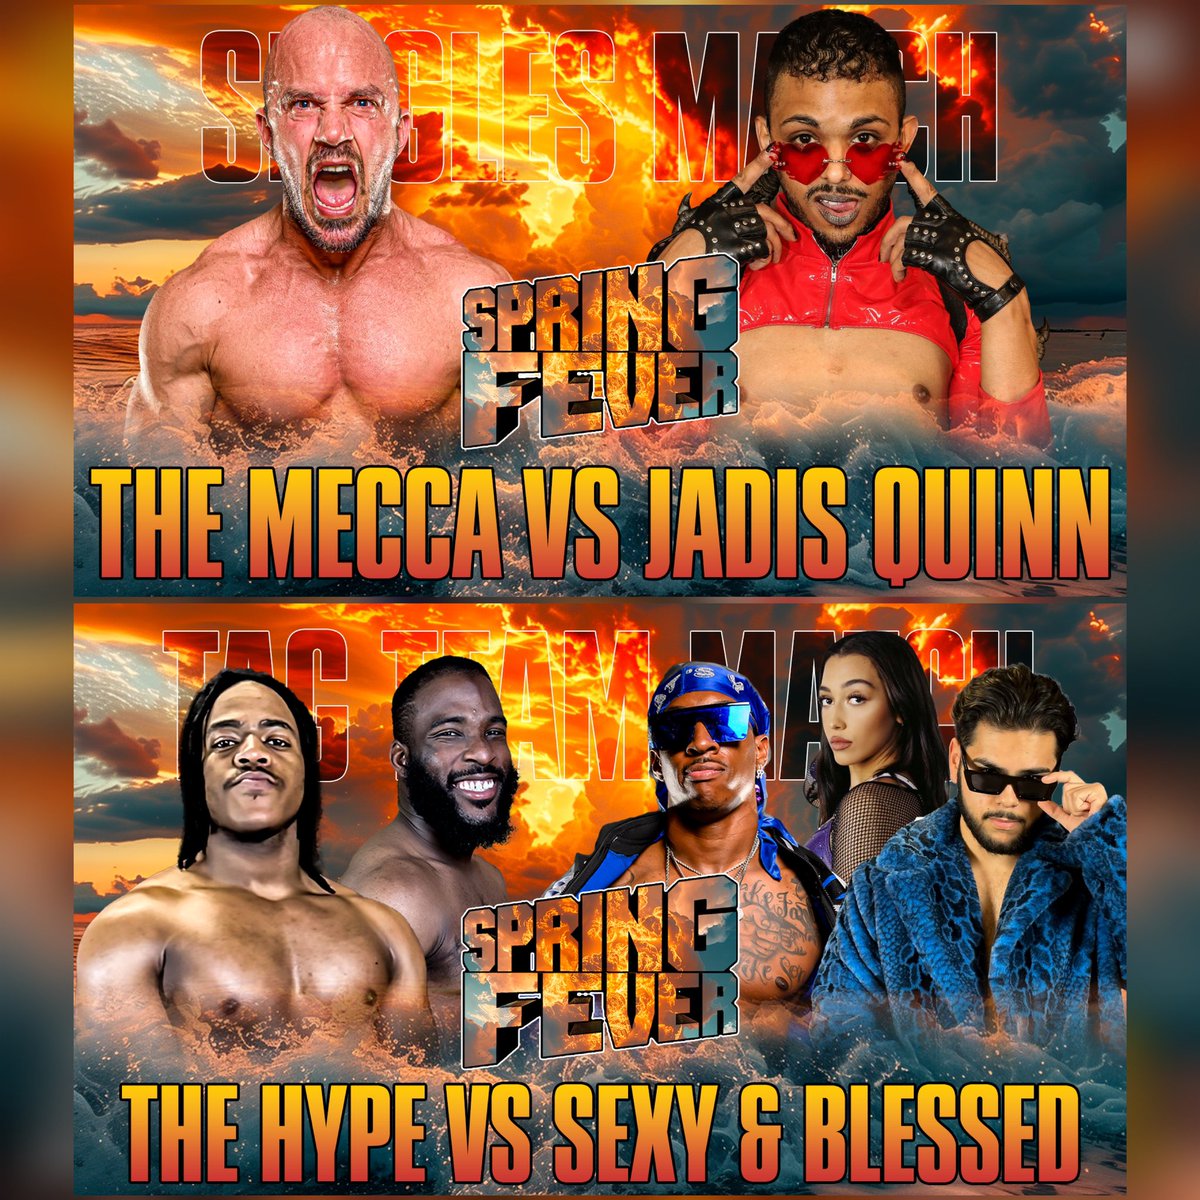 #MCWProWrestling returns to the Ridgely VFD🚒 THIS SATURDAY NIGHT for the final night of the 2024 #MCWSpringFever Tour‼️ @BJo_Mecca 🆚 @JadisQuinn The Hype 🆚 Sexy & Blessed 🎟️ Take advantage of the discounted Family 4️⃣ Pack of tickets and save💰 linktr.ee/mcwprowrestling 🎟️